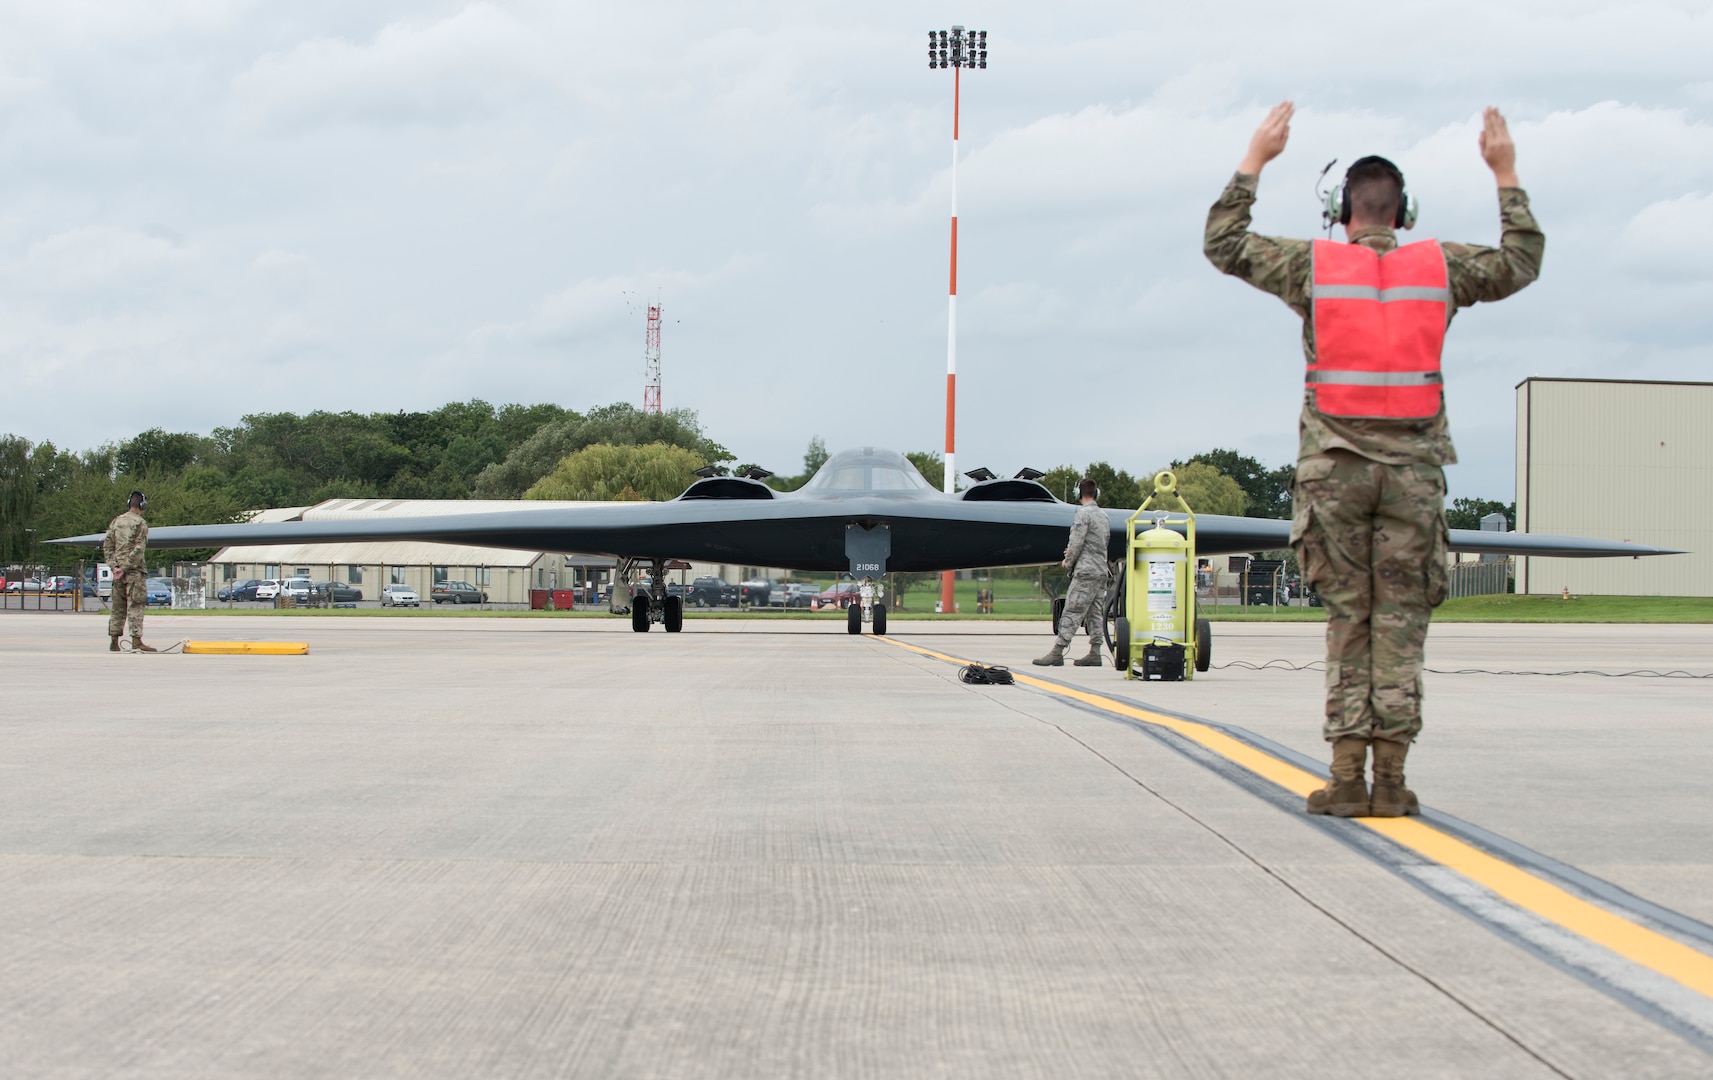 An Airman assigned to the 509th Bomb Wing marshals in Major General James Dawkins Jr., Eighth Air Force commander, as he taxis in a B-2 Spirit on the flight line of Royal Air Force Base Fairford, England, on August 28, 2019. Dawkins flew the stealth bomber during his visit to engage with members of Whiteman Air Force Base, Missouri, who had deployed to Royal Air Force Fairford as a Bomber Task Force to conduct theater integration and flying training. (U.S. Air Force photo by Staff Sgt. Kayla White)